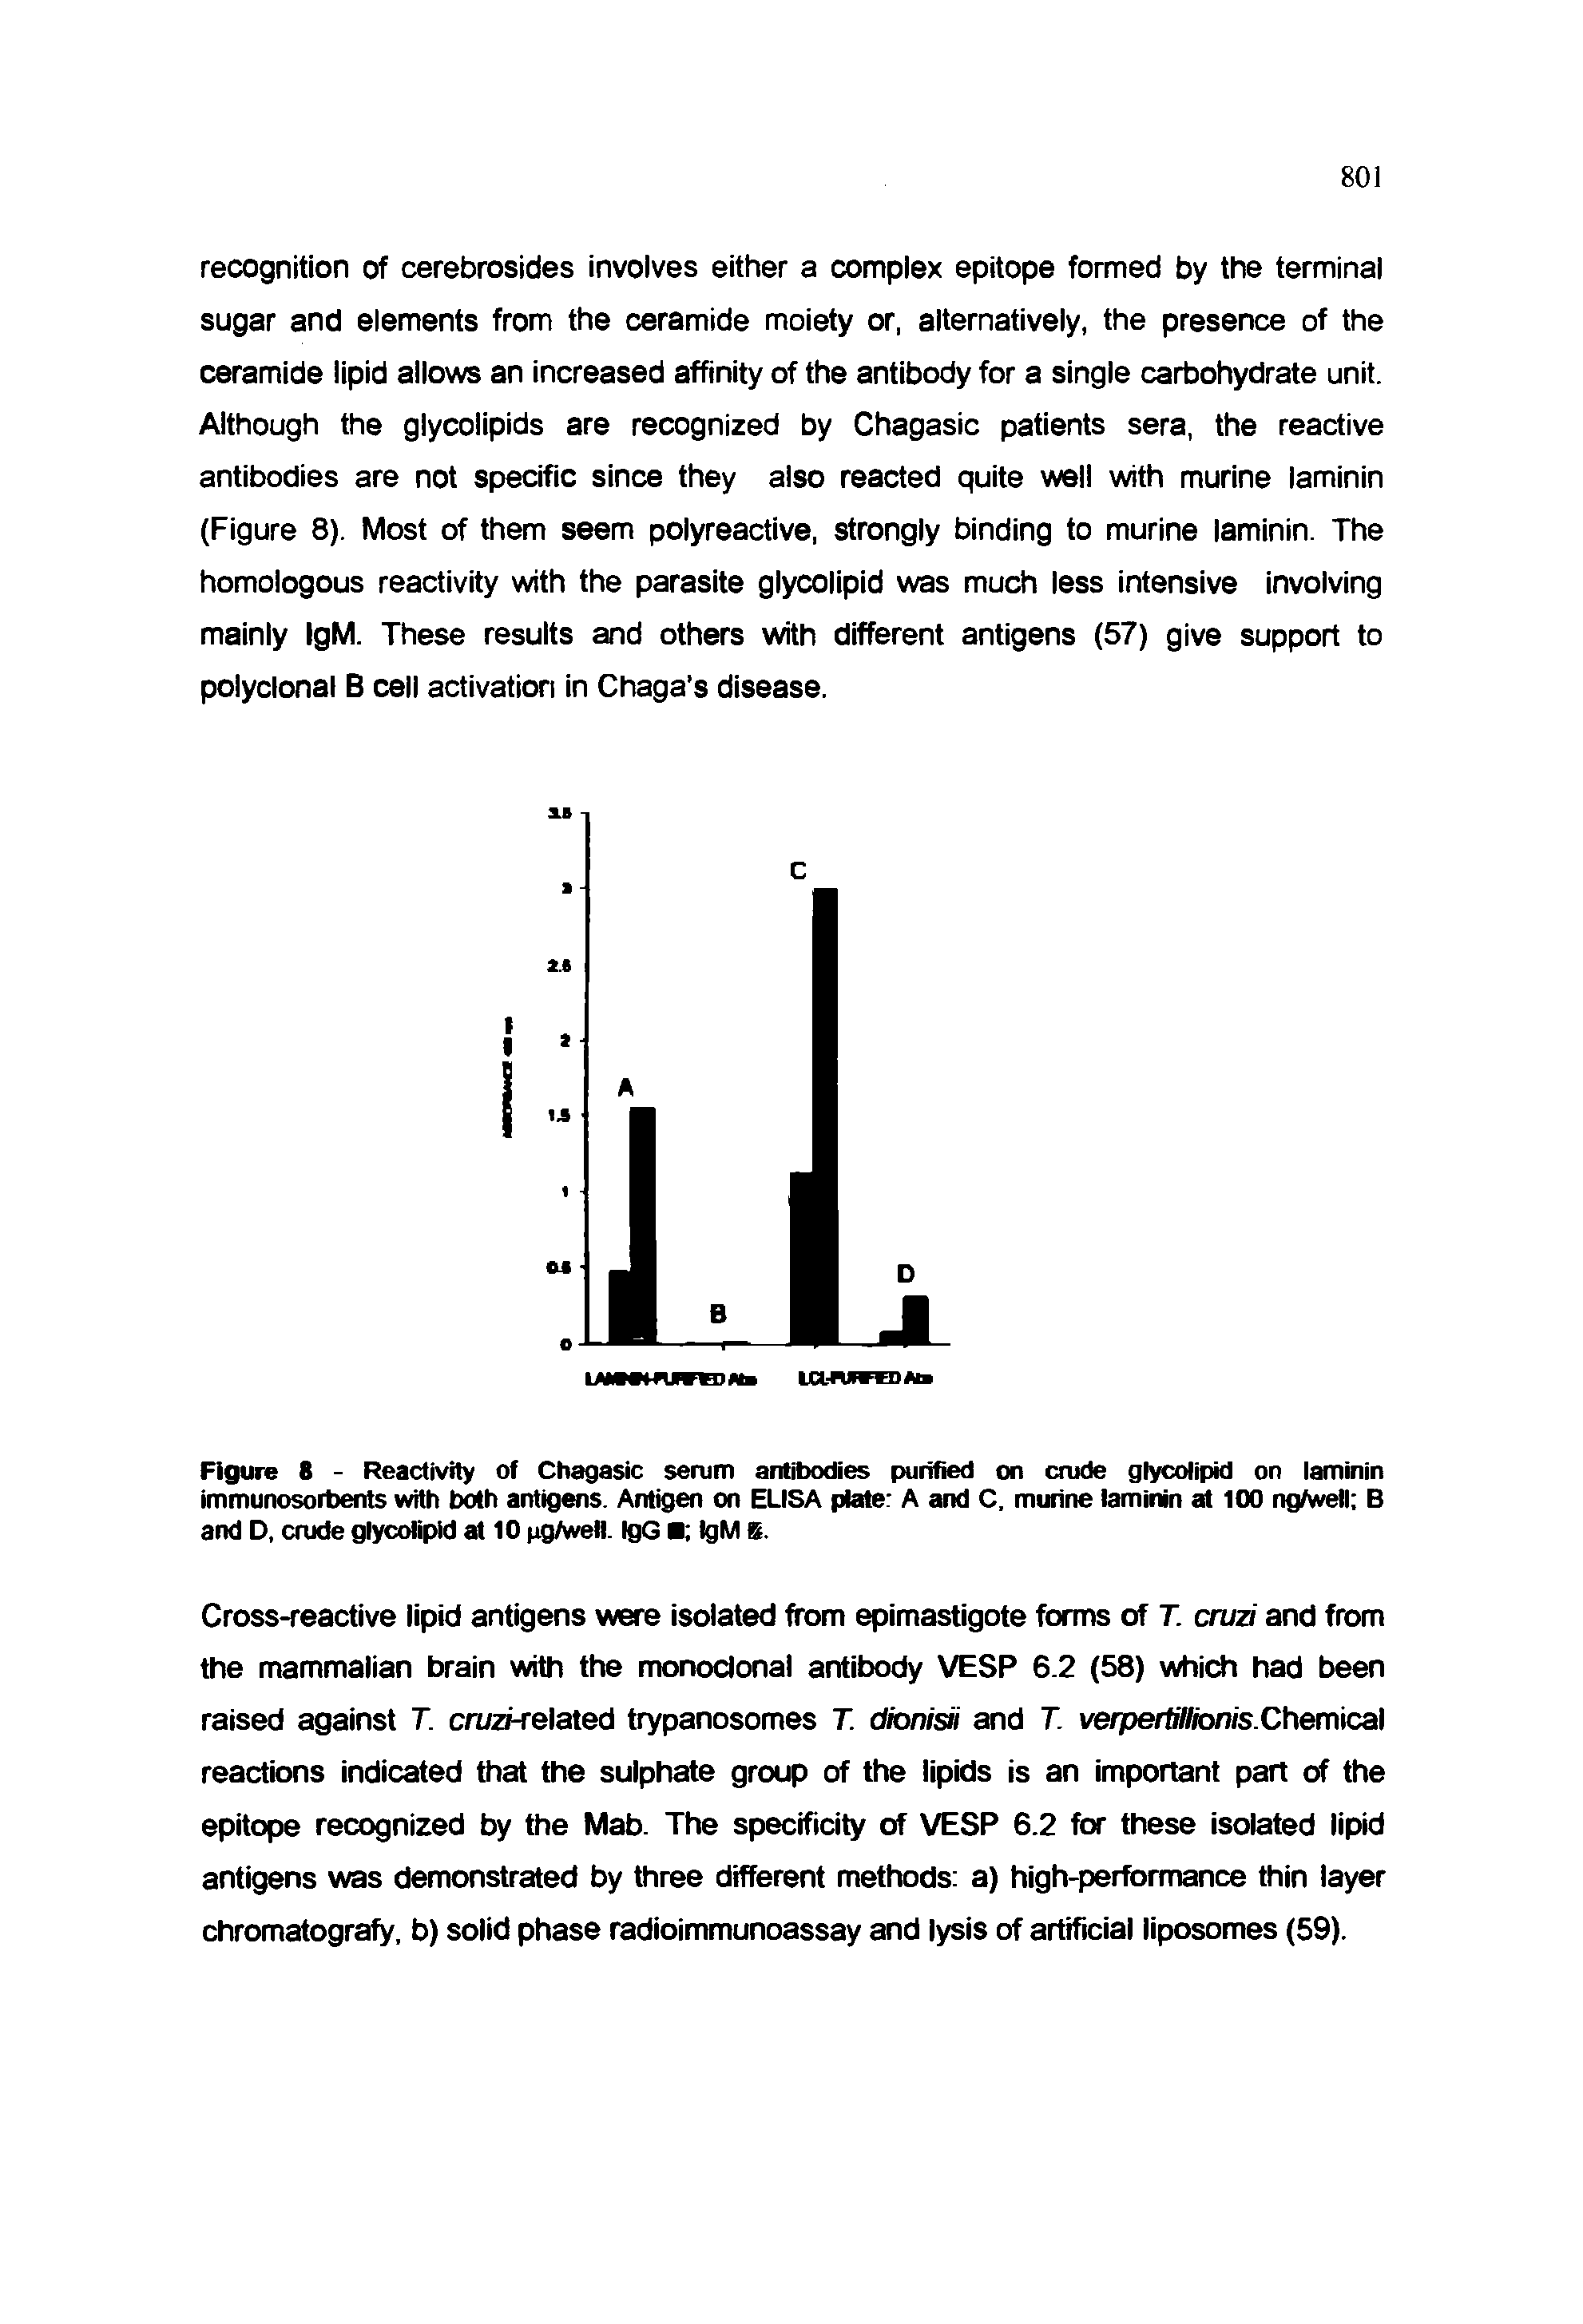 Figure 8 - Reactivity of Chagasic serum antibodies purified on crude glycolipid on laminin immunosorbents with both antigens. Antigen on ELISA plate A and C. murine laminin at 100 ng/well B and D, crude glycolipid at 10 pg/well. IgG IgM B.